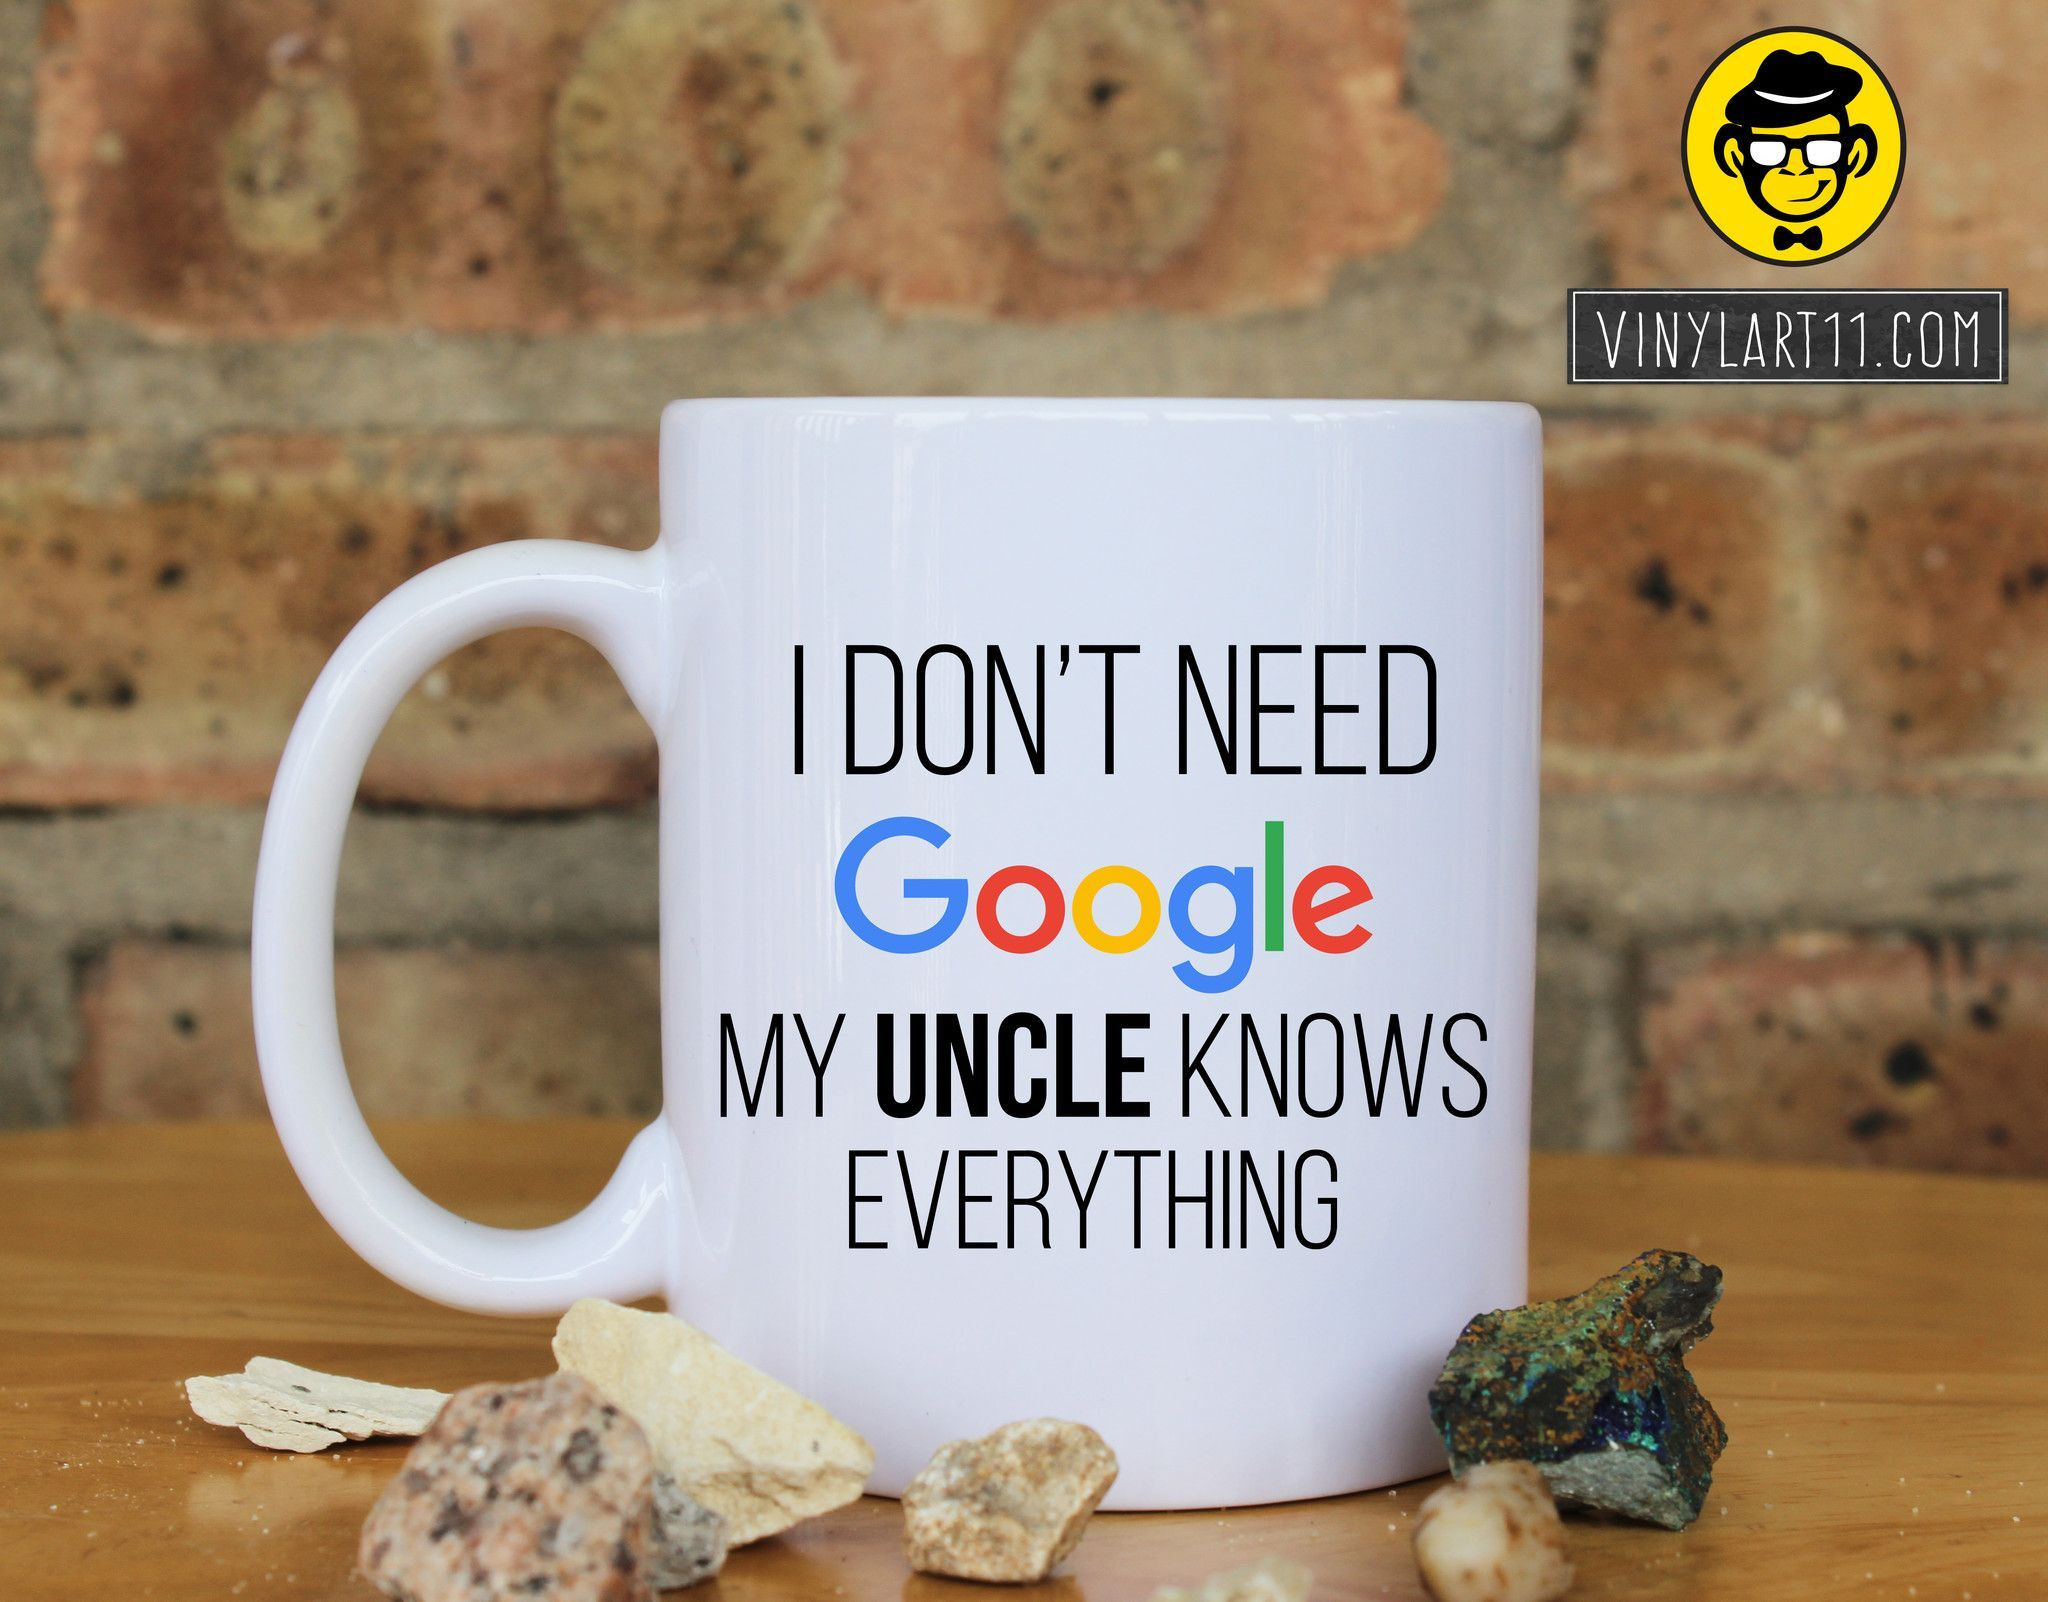 Christmas Gift Ideas For Uncle
 I Don t Need Google My UNCLE Knows Everything Ceramic